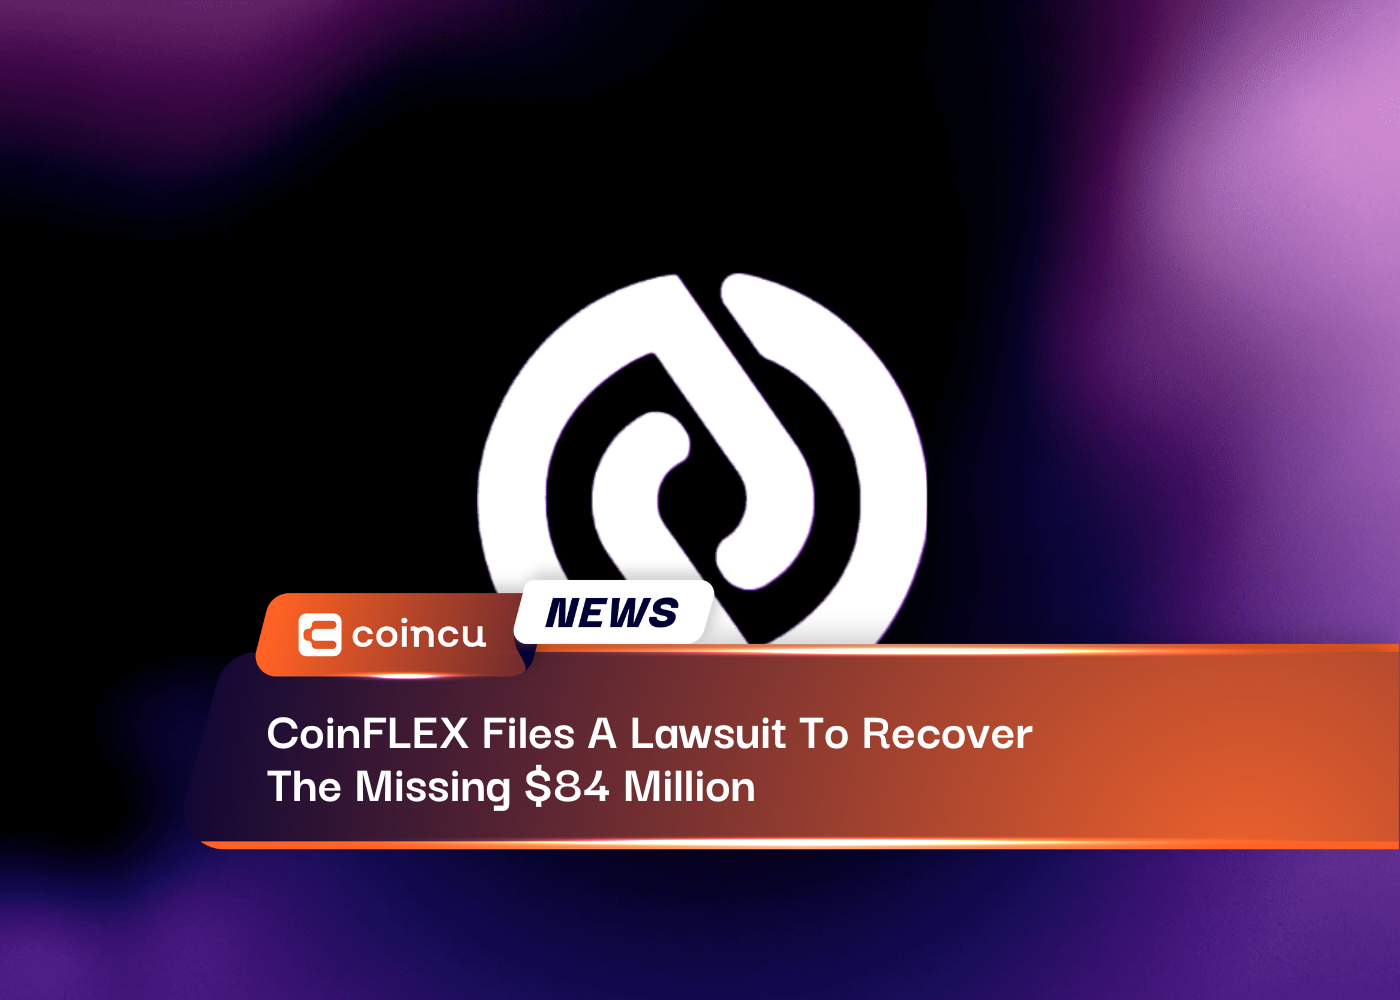 CoinFLEX Files A Lawsuit To Recover The Missing $84 Million